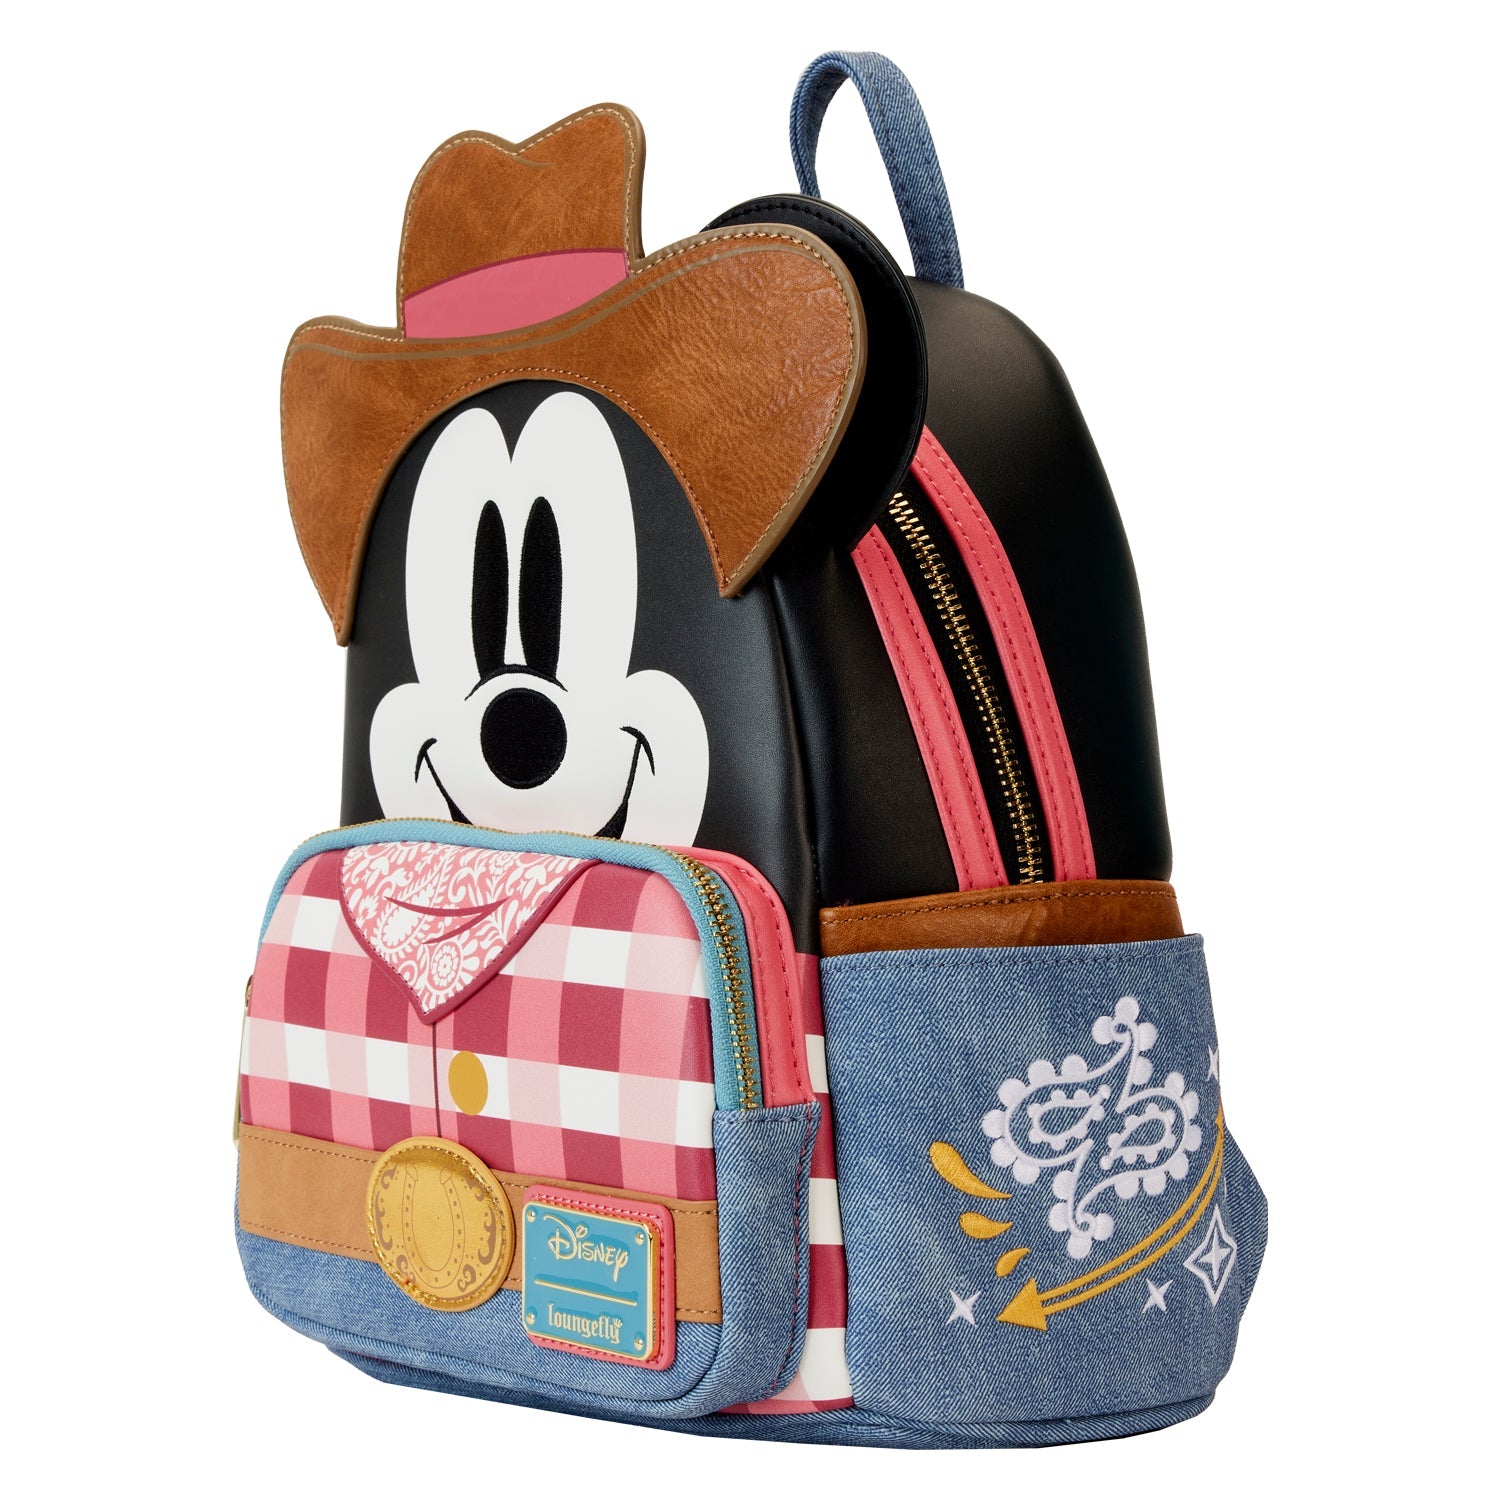 Loungefly x Disney Western Mickey Mouse Cosplay Mini Backpack - GeekCore